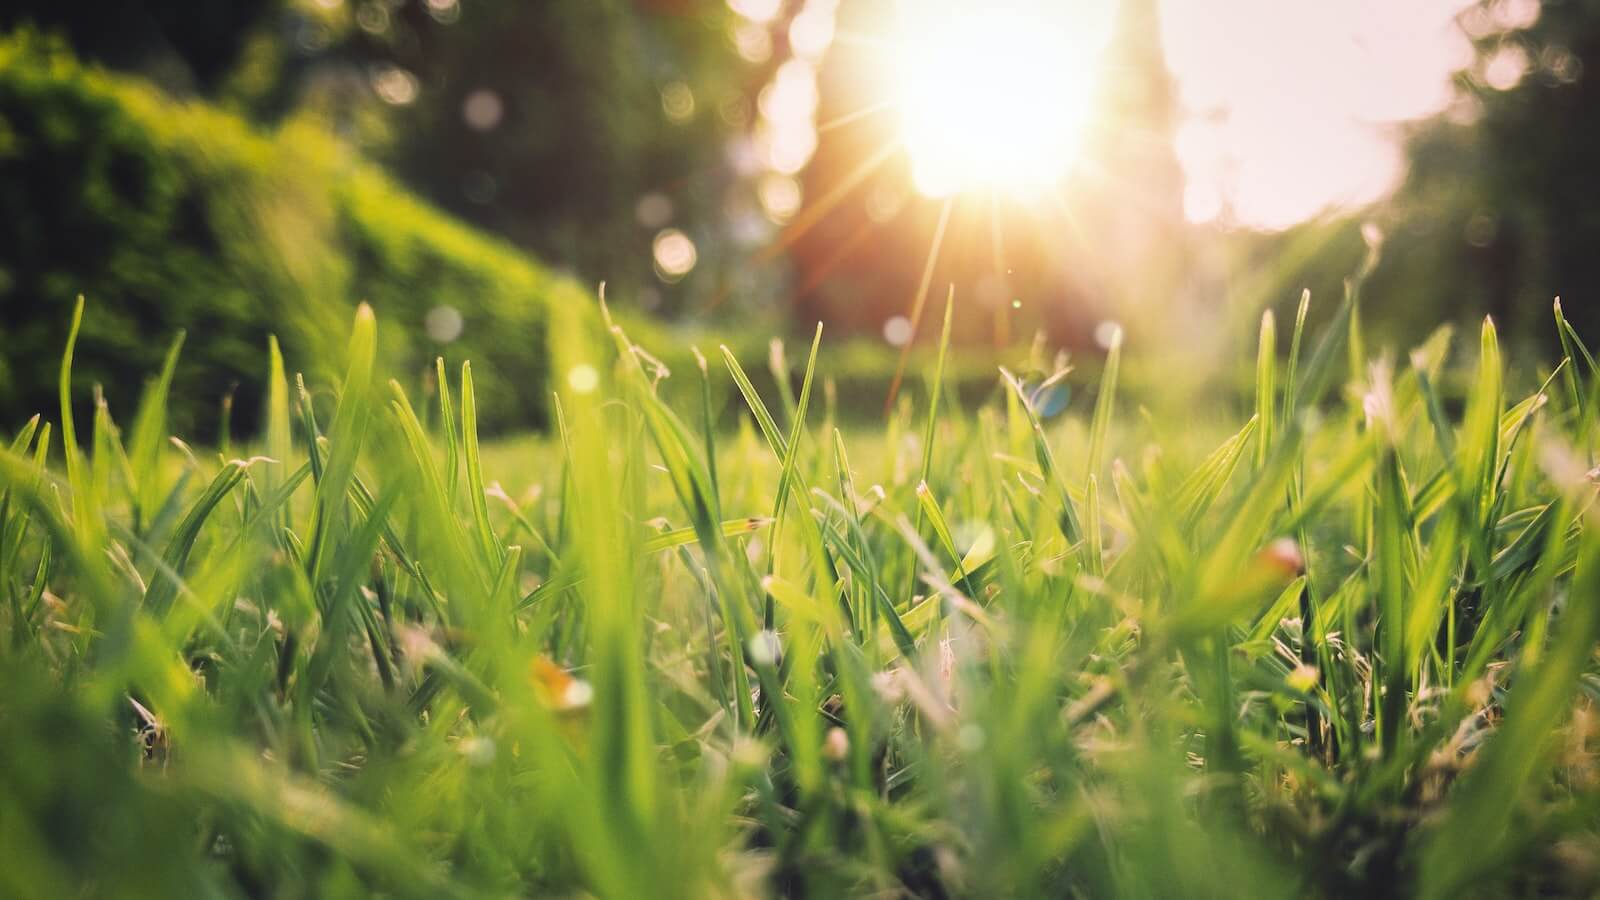 Grass and sunshine in the spring